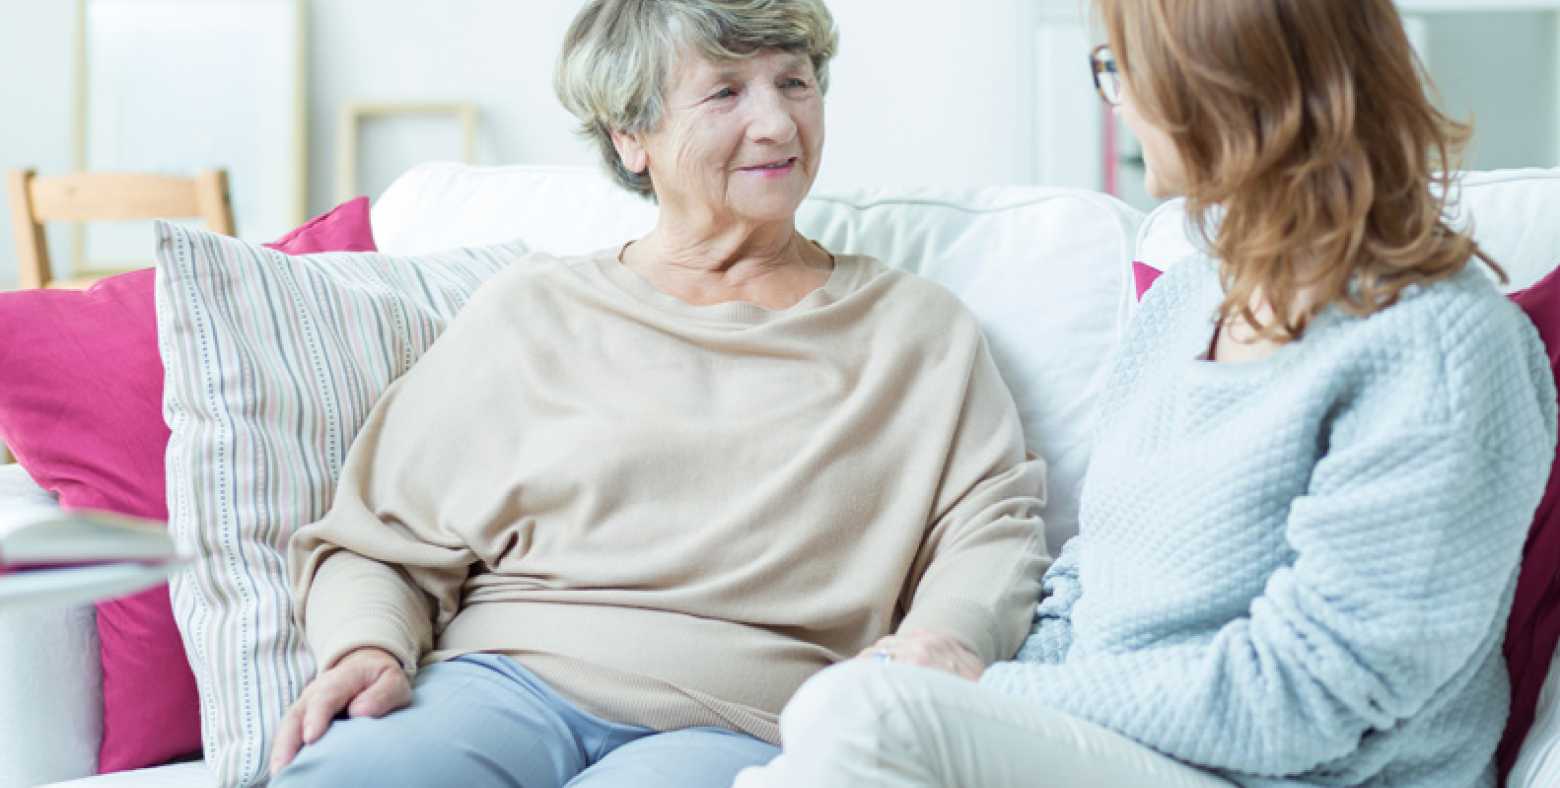 elderly woman and middle-aged woman sitting on couch talking